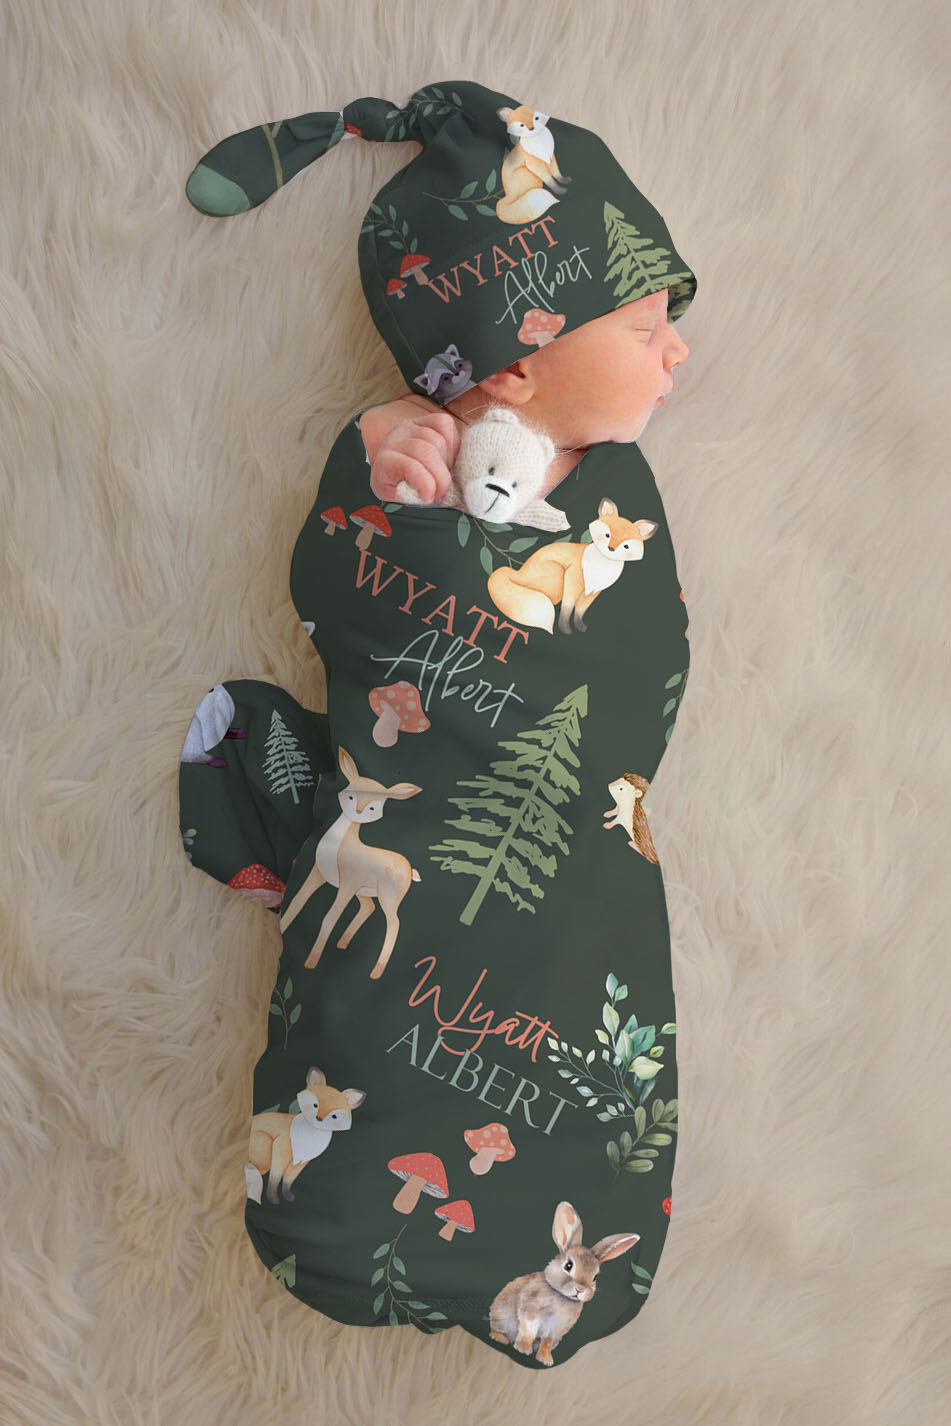 Swaddle Blanket with Personalization - Moss Woodland - 42" x 42"